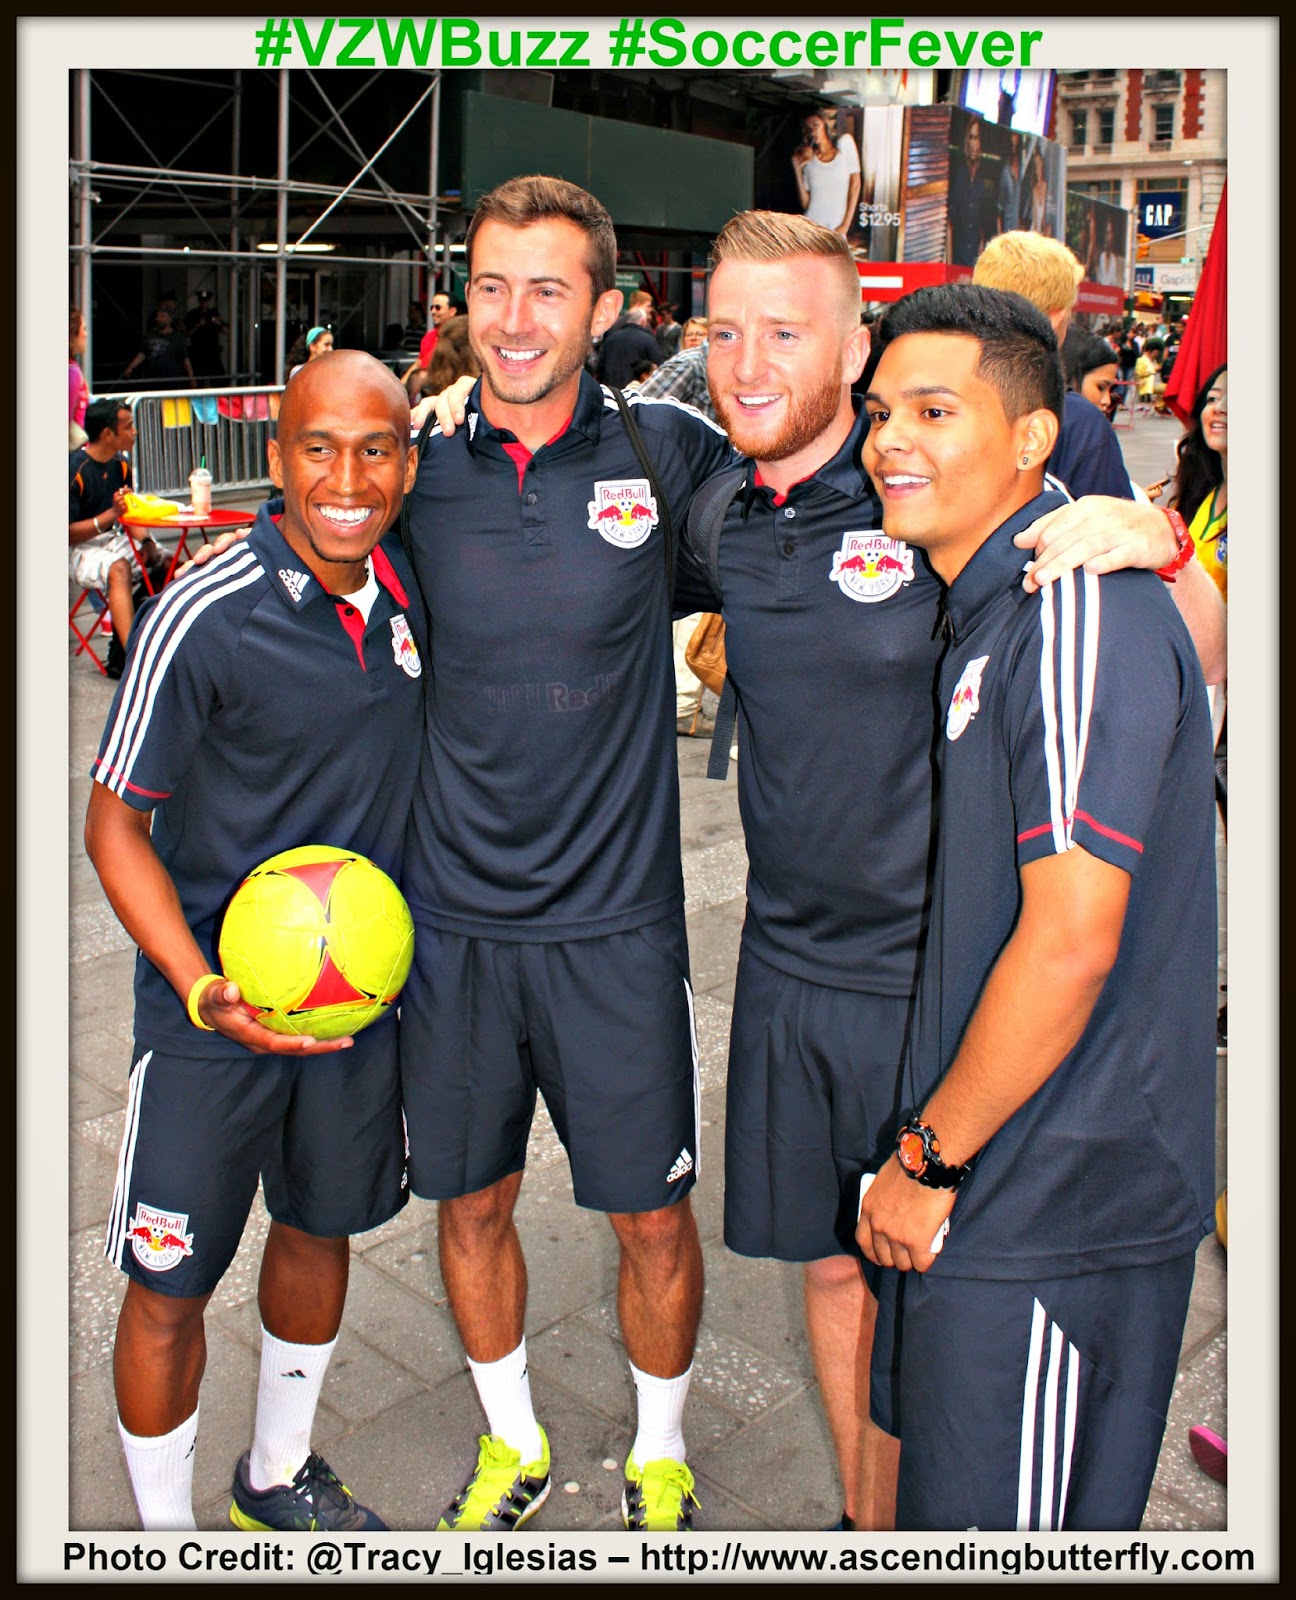 The New York Red Bulls and New York City Bloggers Times Square New York #VZWBuzz #SoccerFever